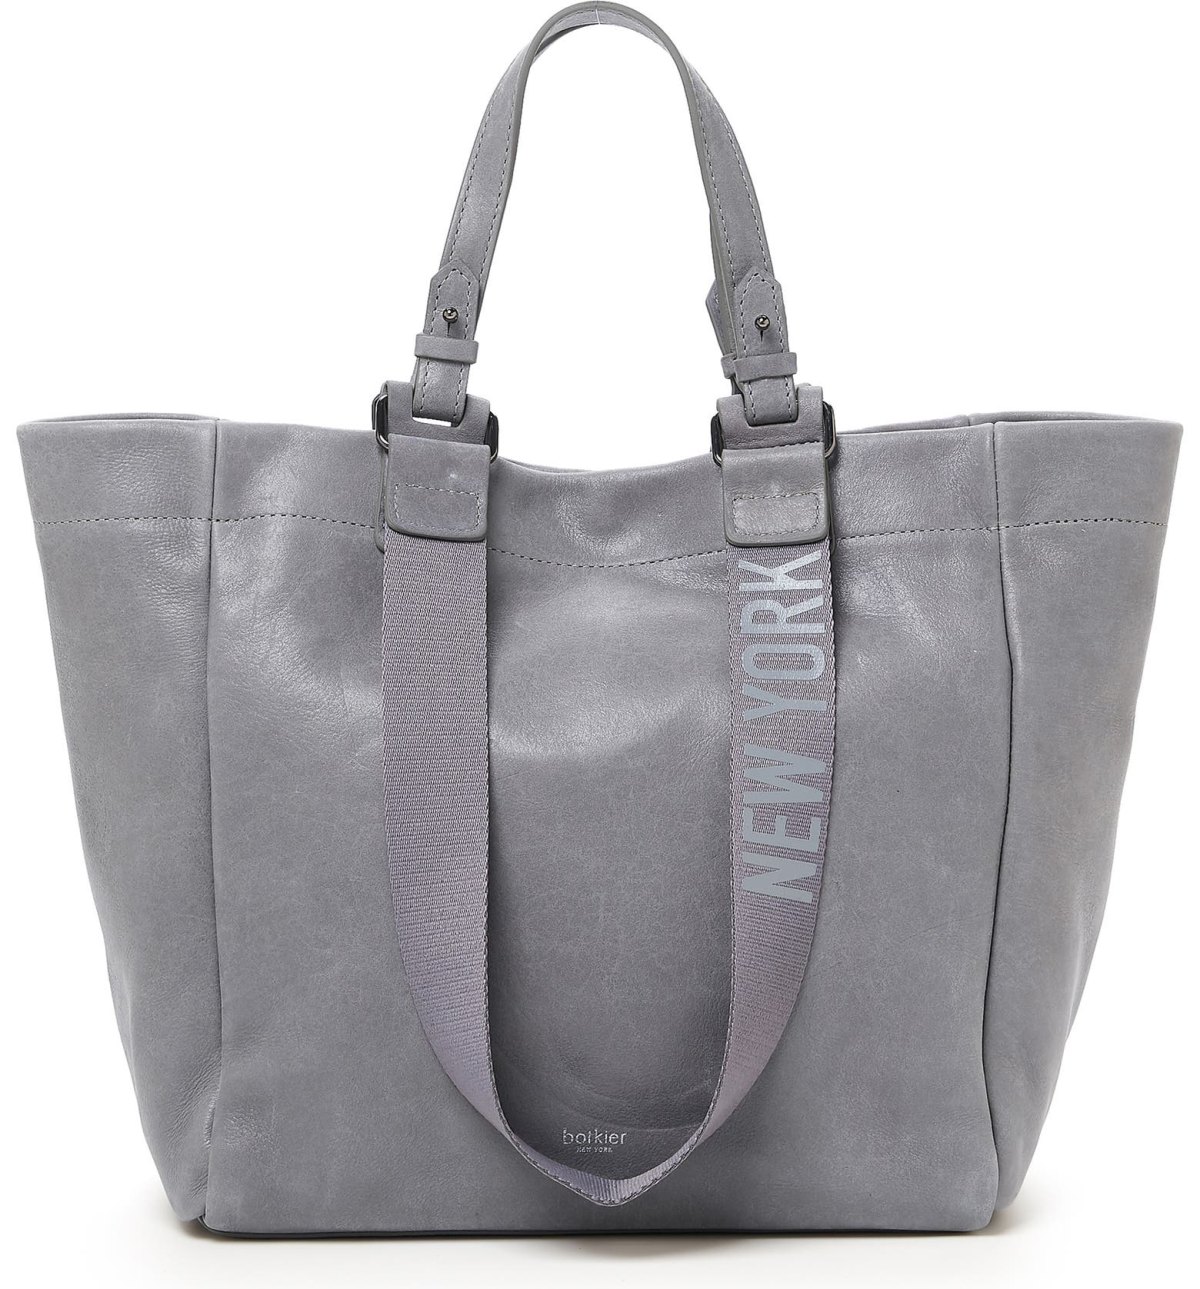 13 Best Designer Tote Bags from $55 to $498